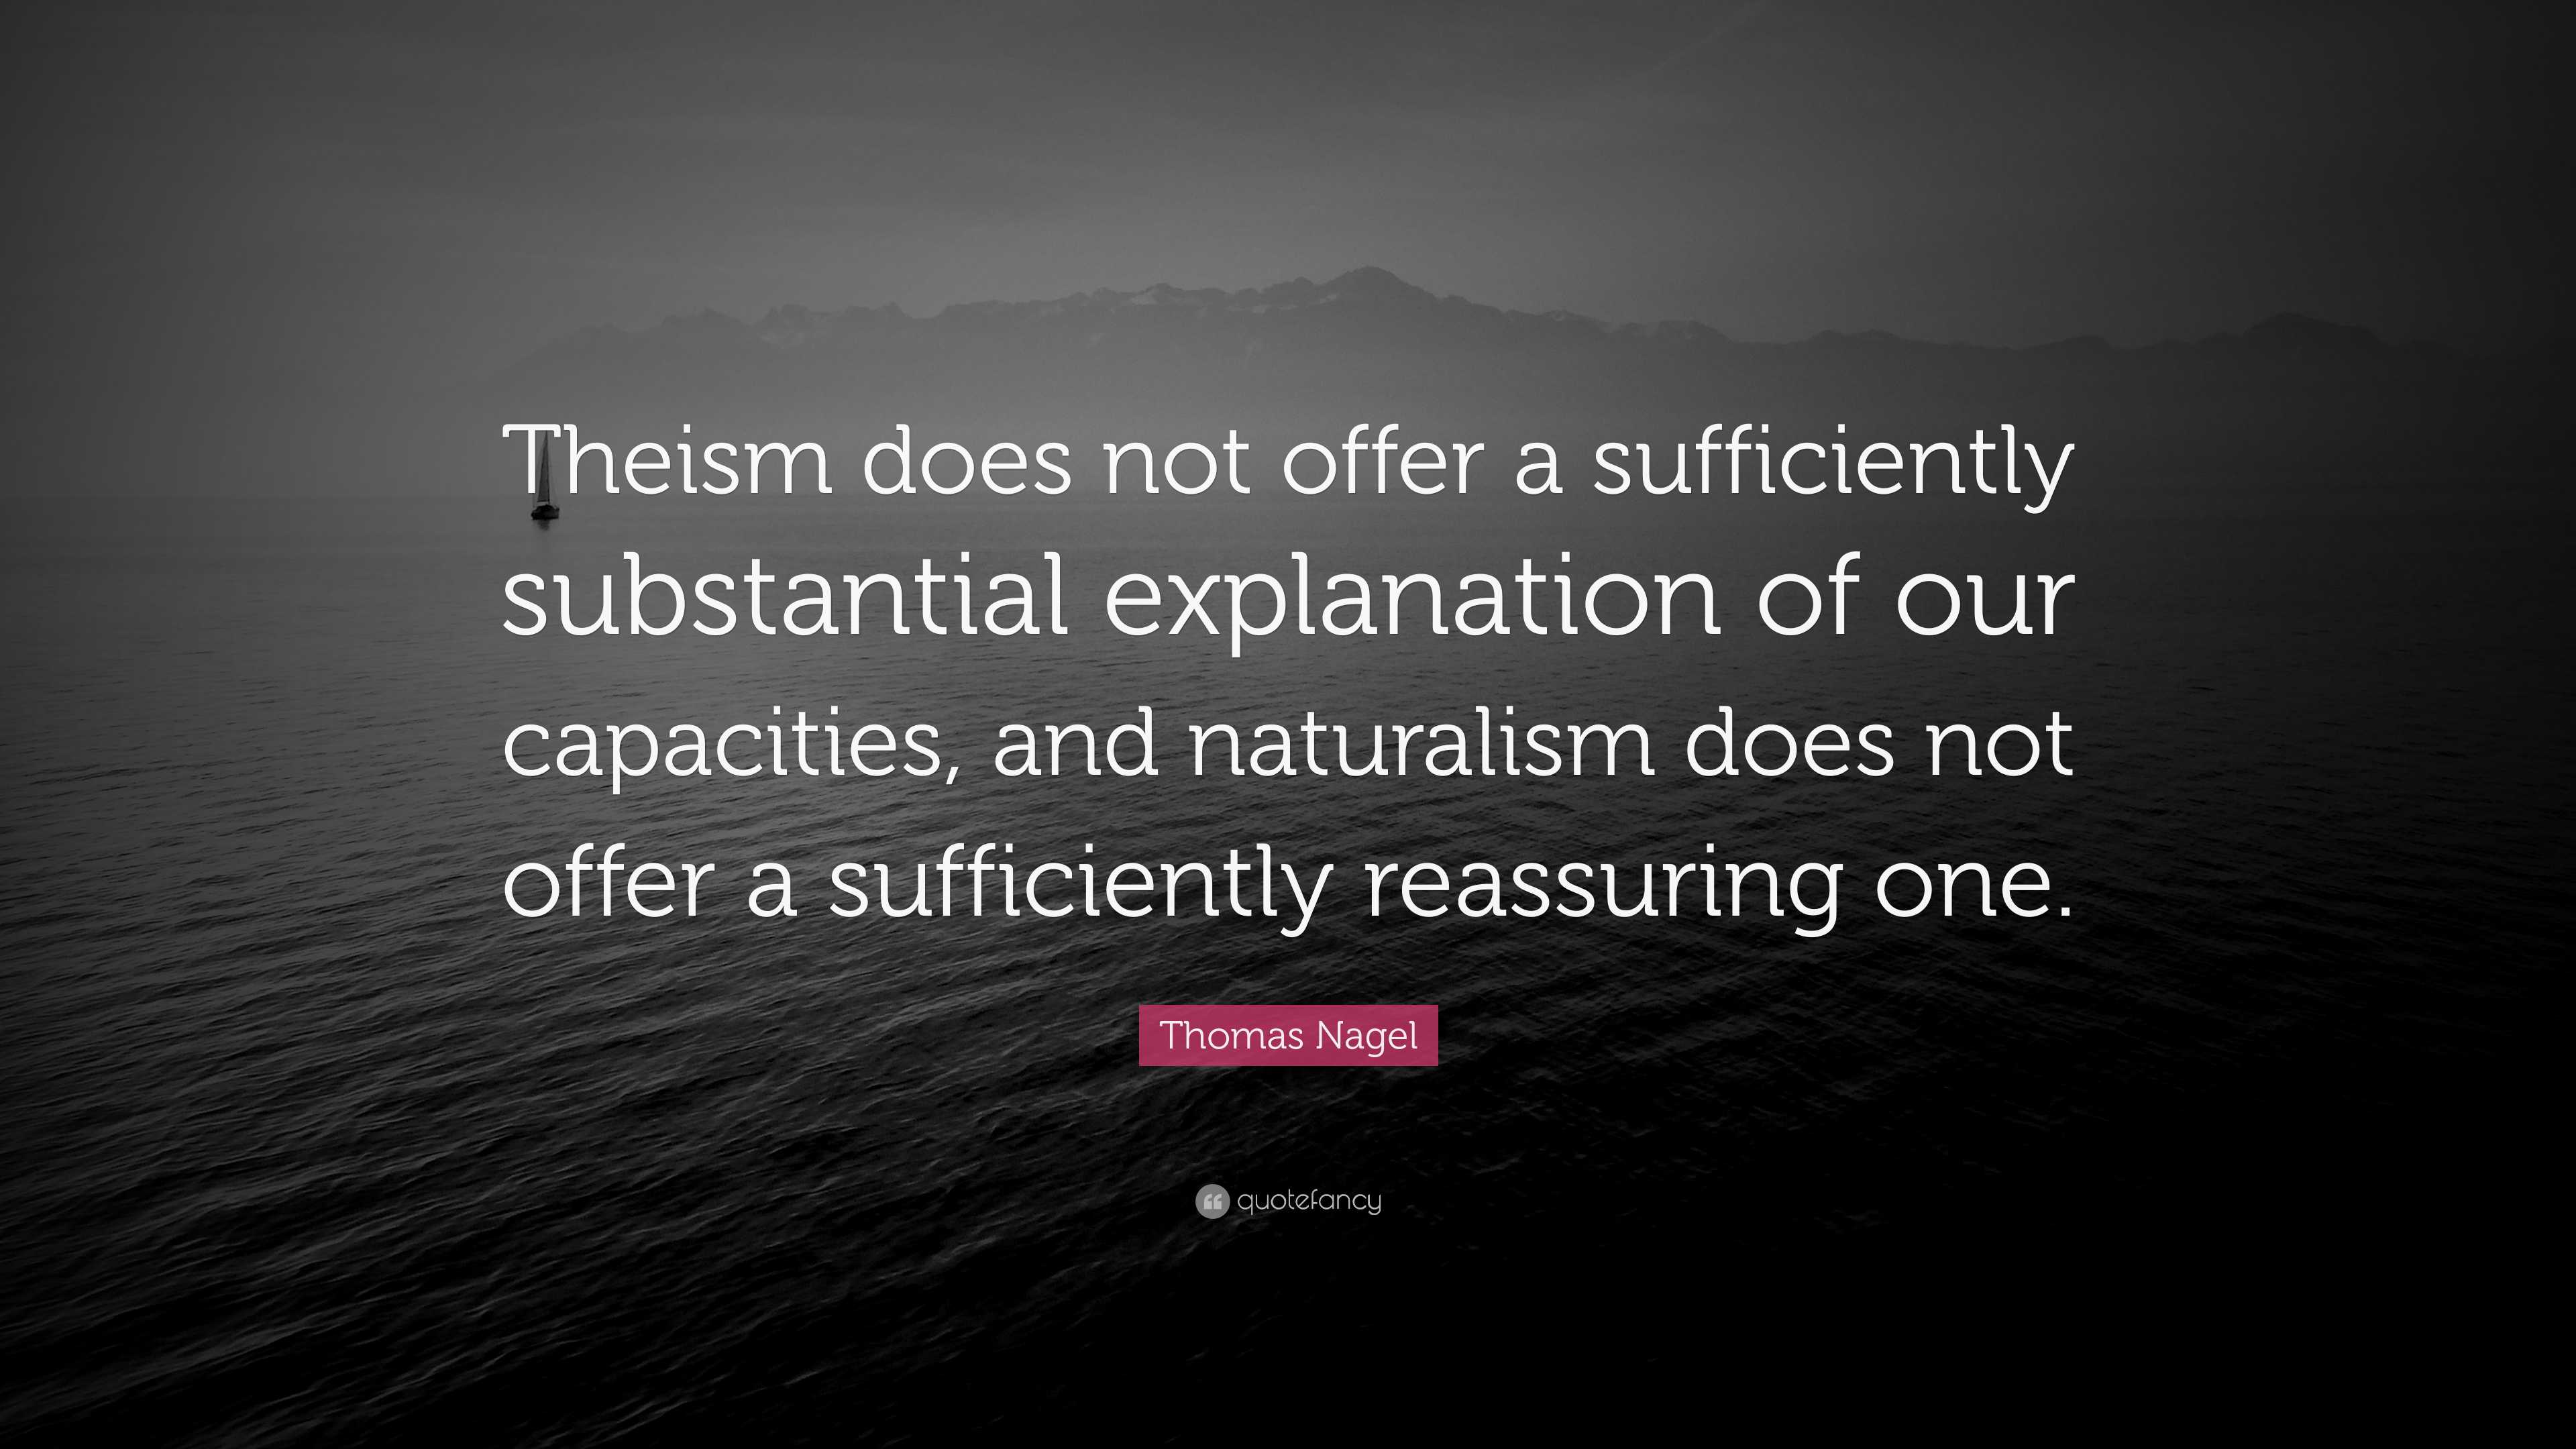 Thomas Nagel Quote: “Theism does not offer a sufficiently substantial ...